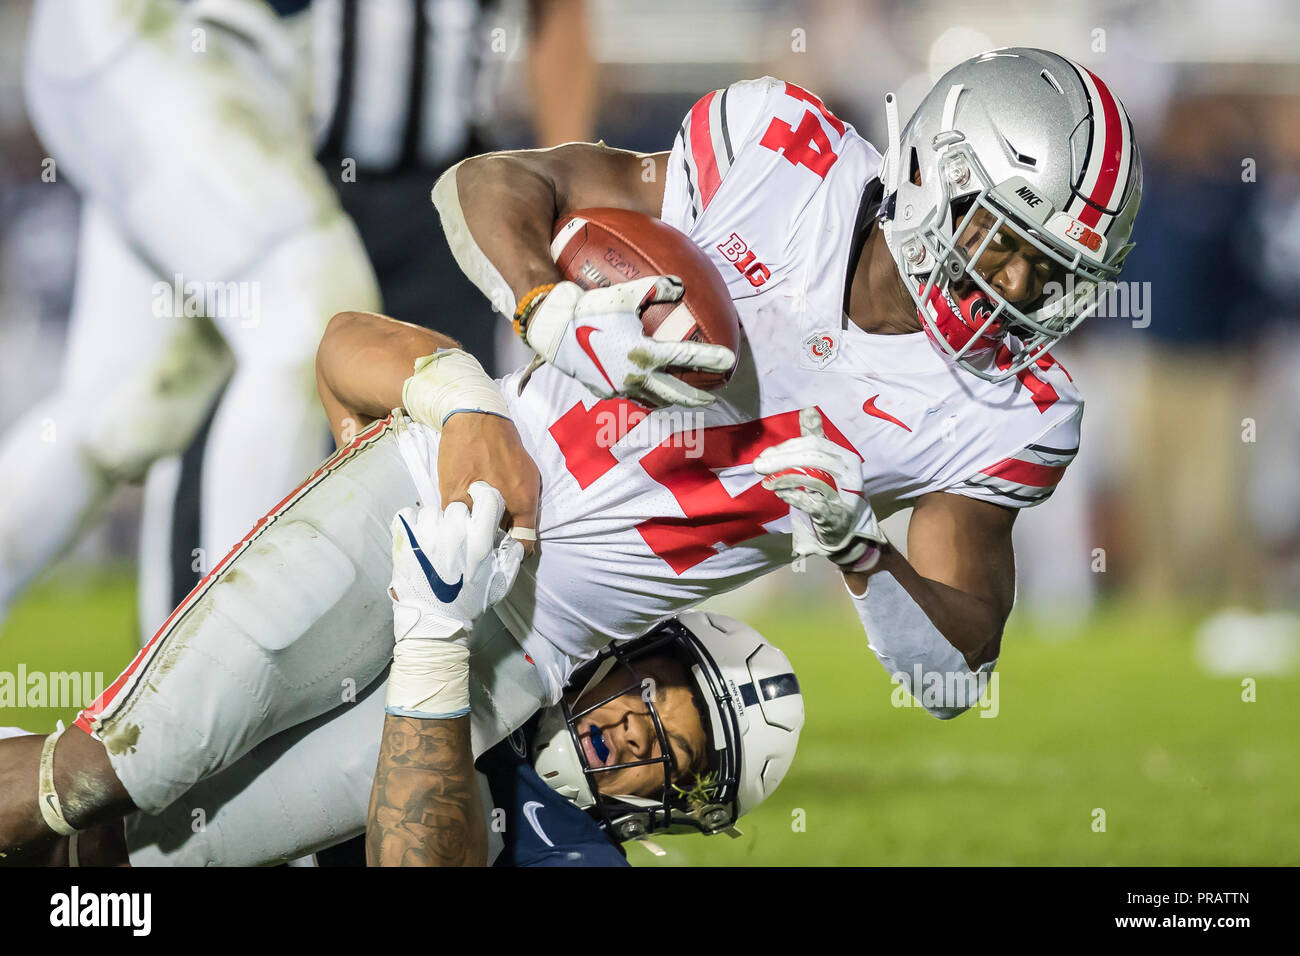 University Park, Pennsylvania, USA. 29th Sep, 2018. Ohio State Buckeyes wide receiver K.J. Hill (14) is tackled after a reception during the second half of the NCAA football game between the Ohio State Buckeyes and the Penn State Nittany Lions at Beaver Stadium in University Park, Pennsylvania. Credit: csm/Alamy Live News Stock Photo